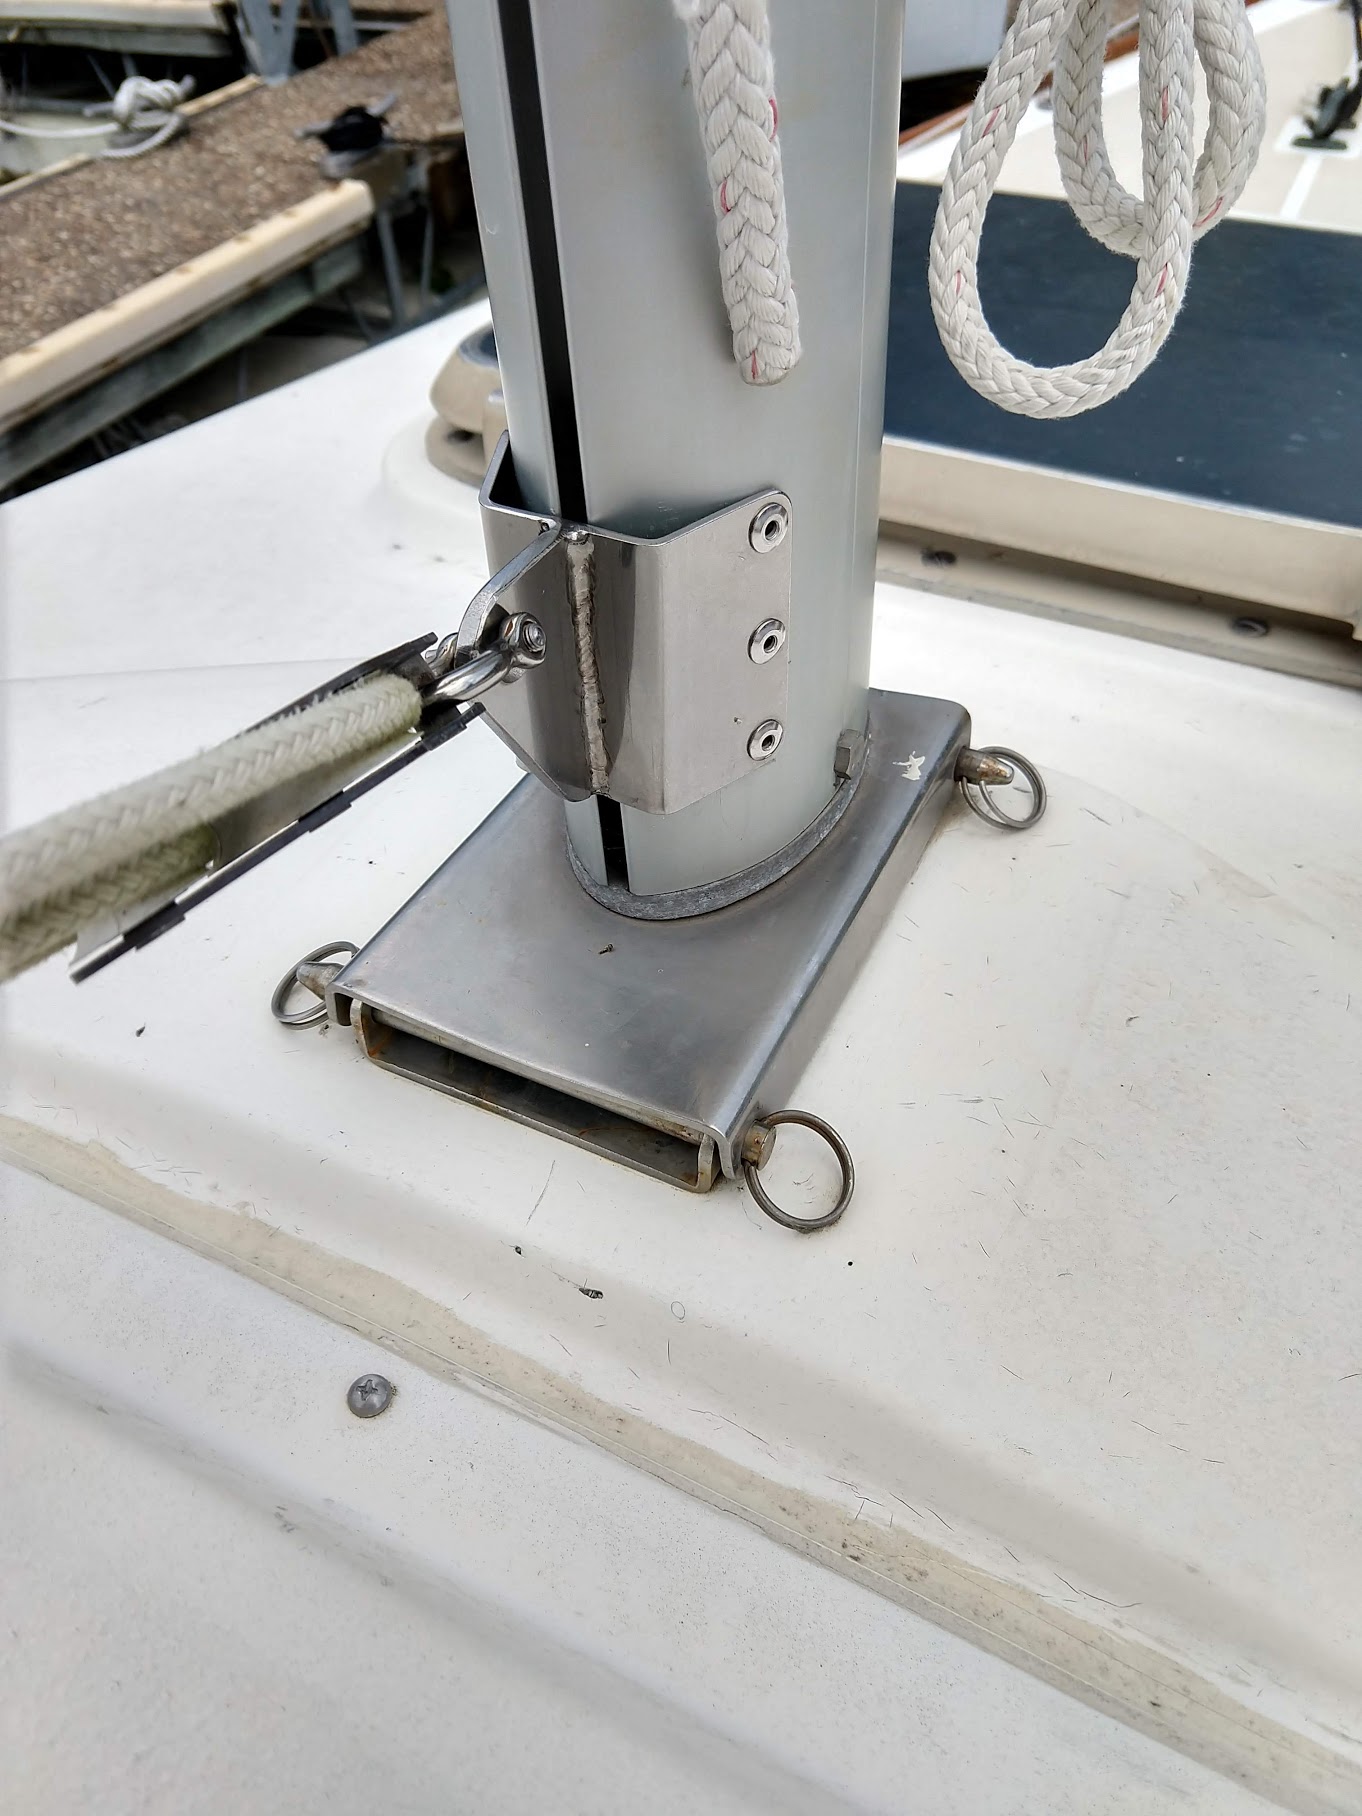 Starboard view of mast base on collar and hinge plate